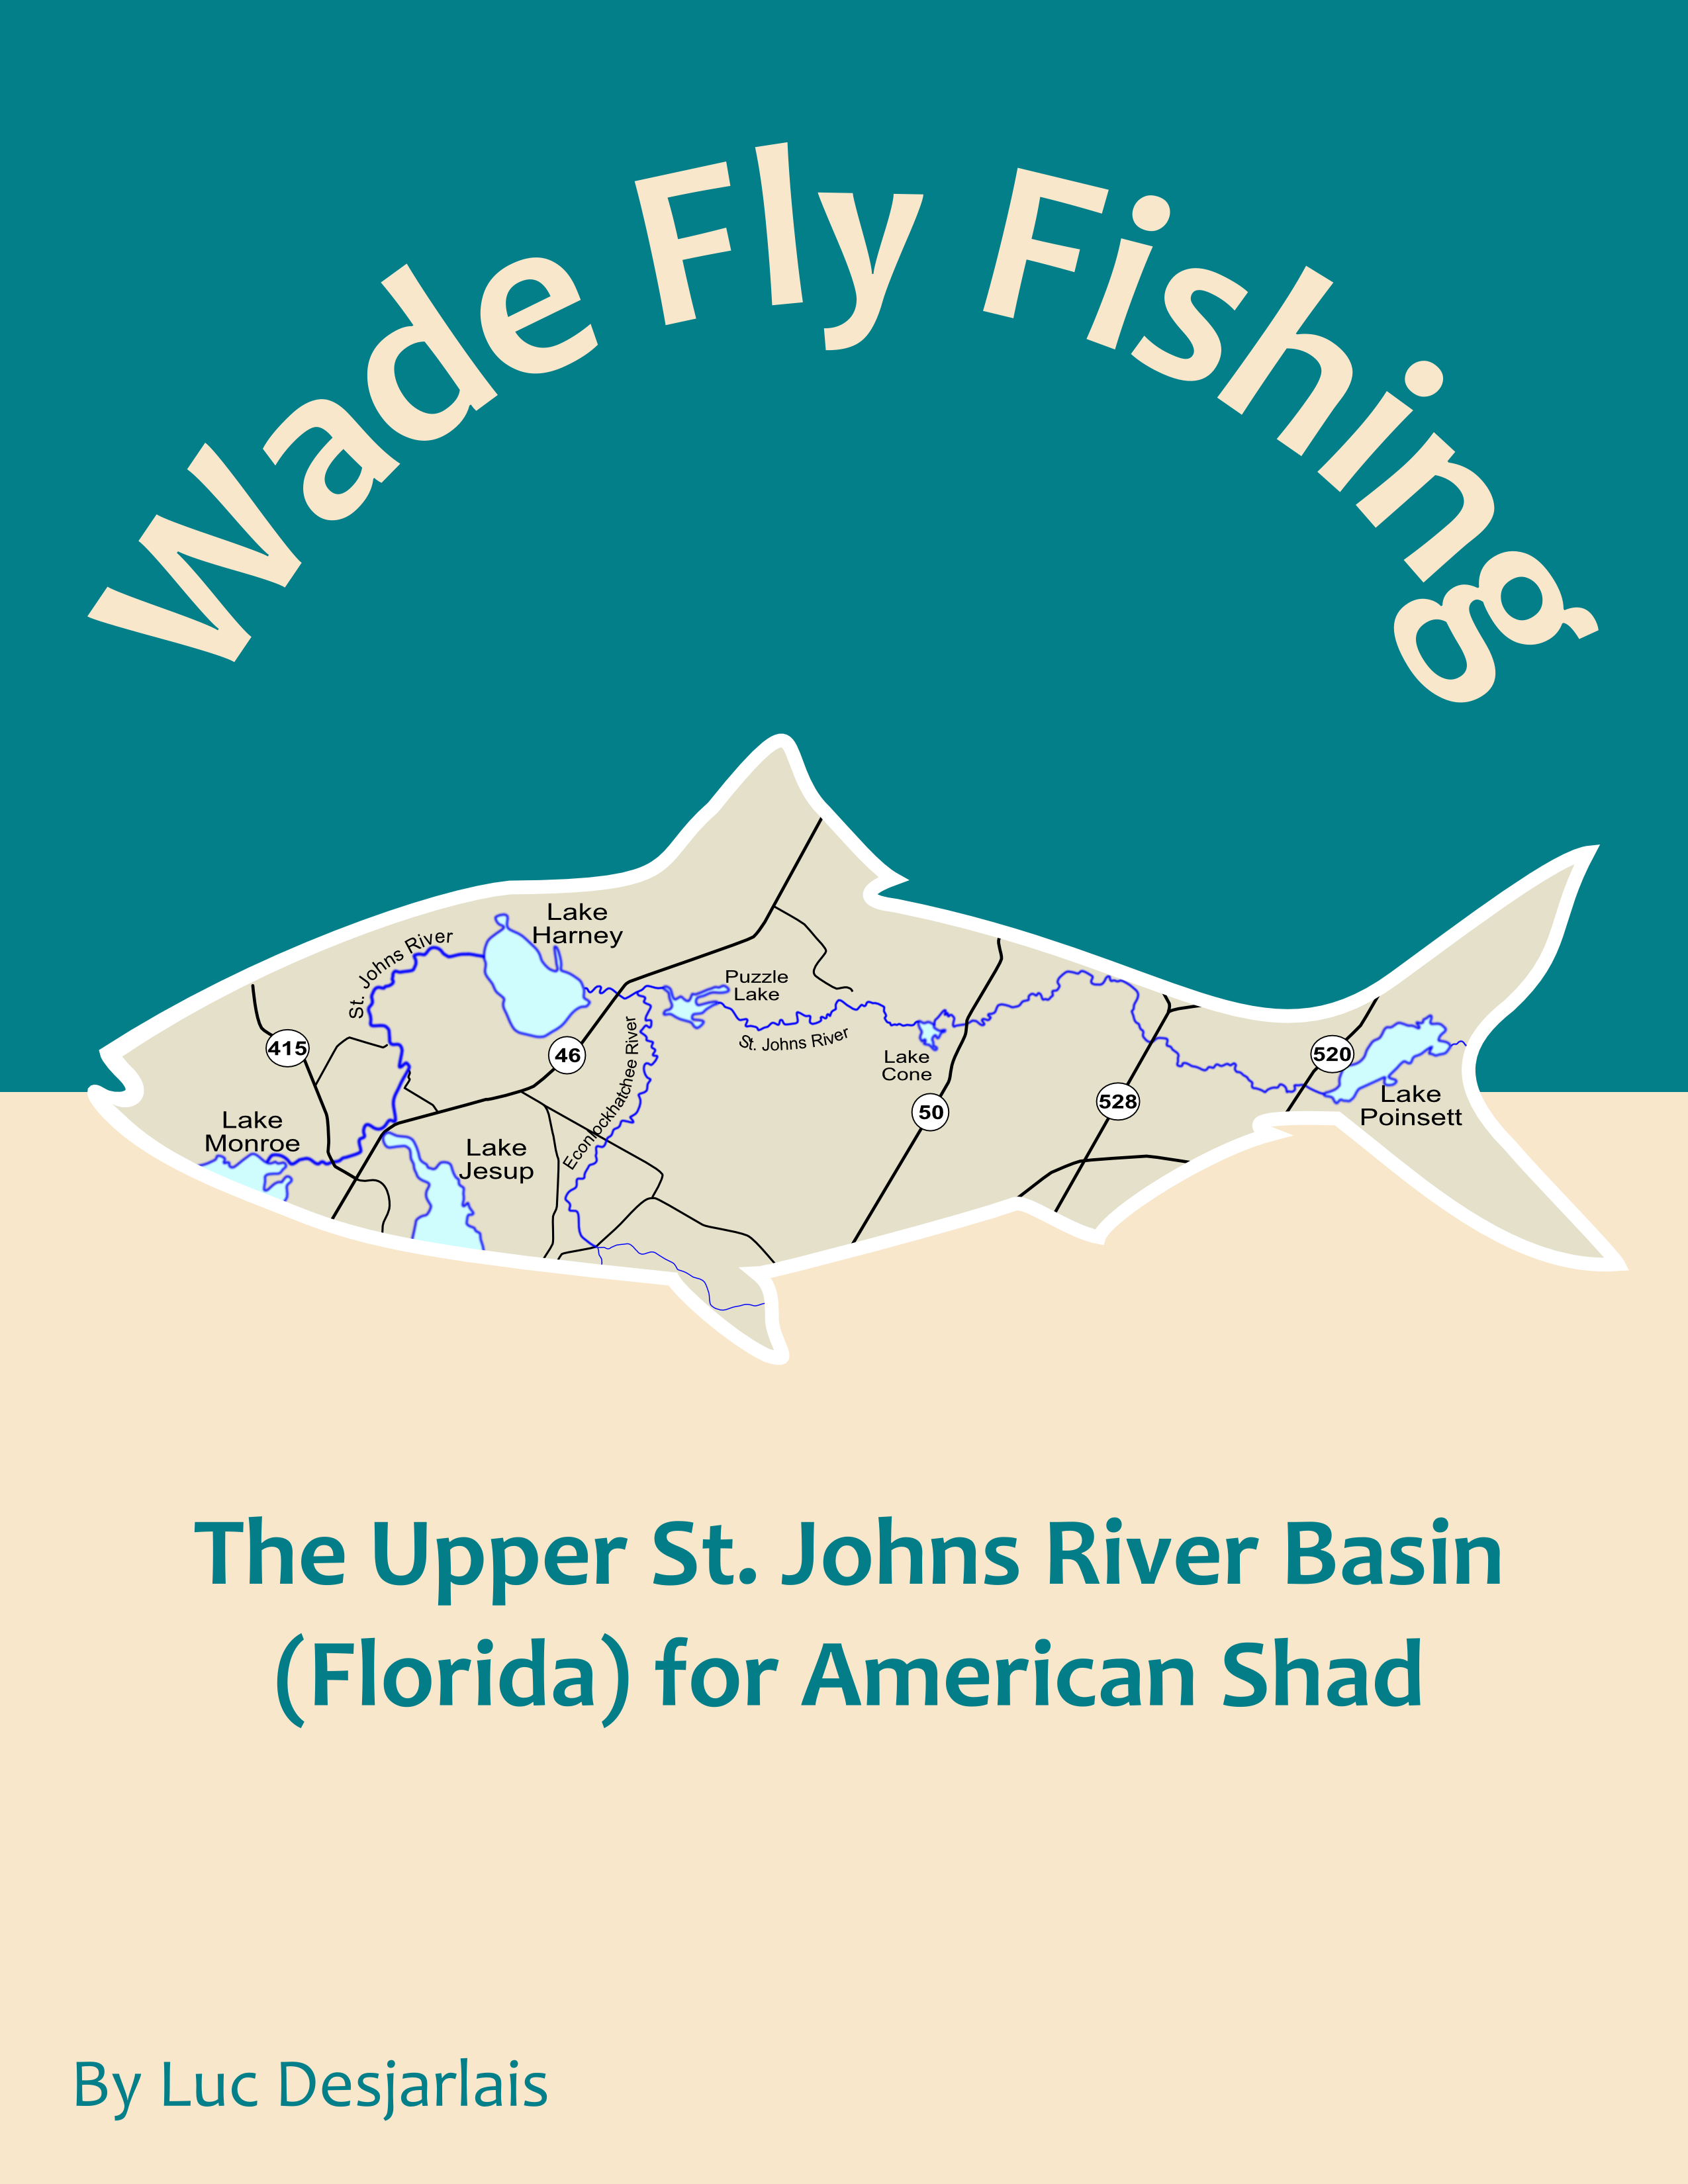 http://wadeflyfishing.com/wp-content/uploads/2014/10/Cover-Shad-Book-Inkscape.png